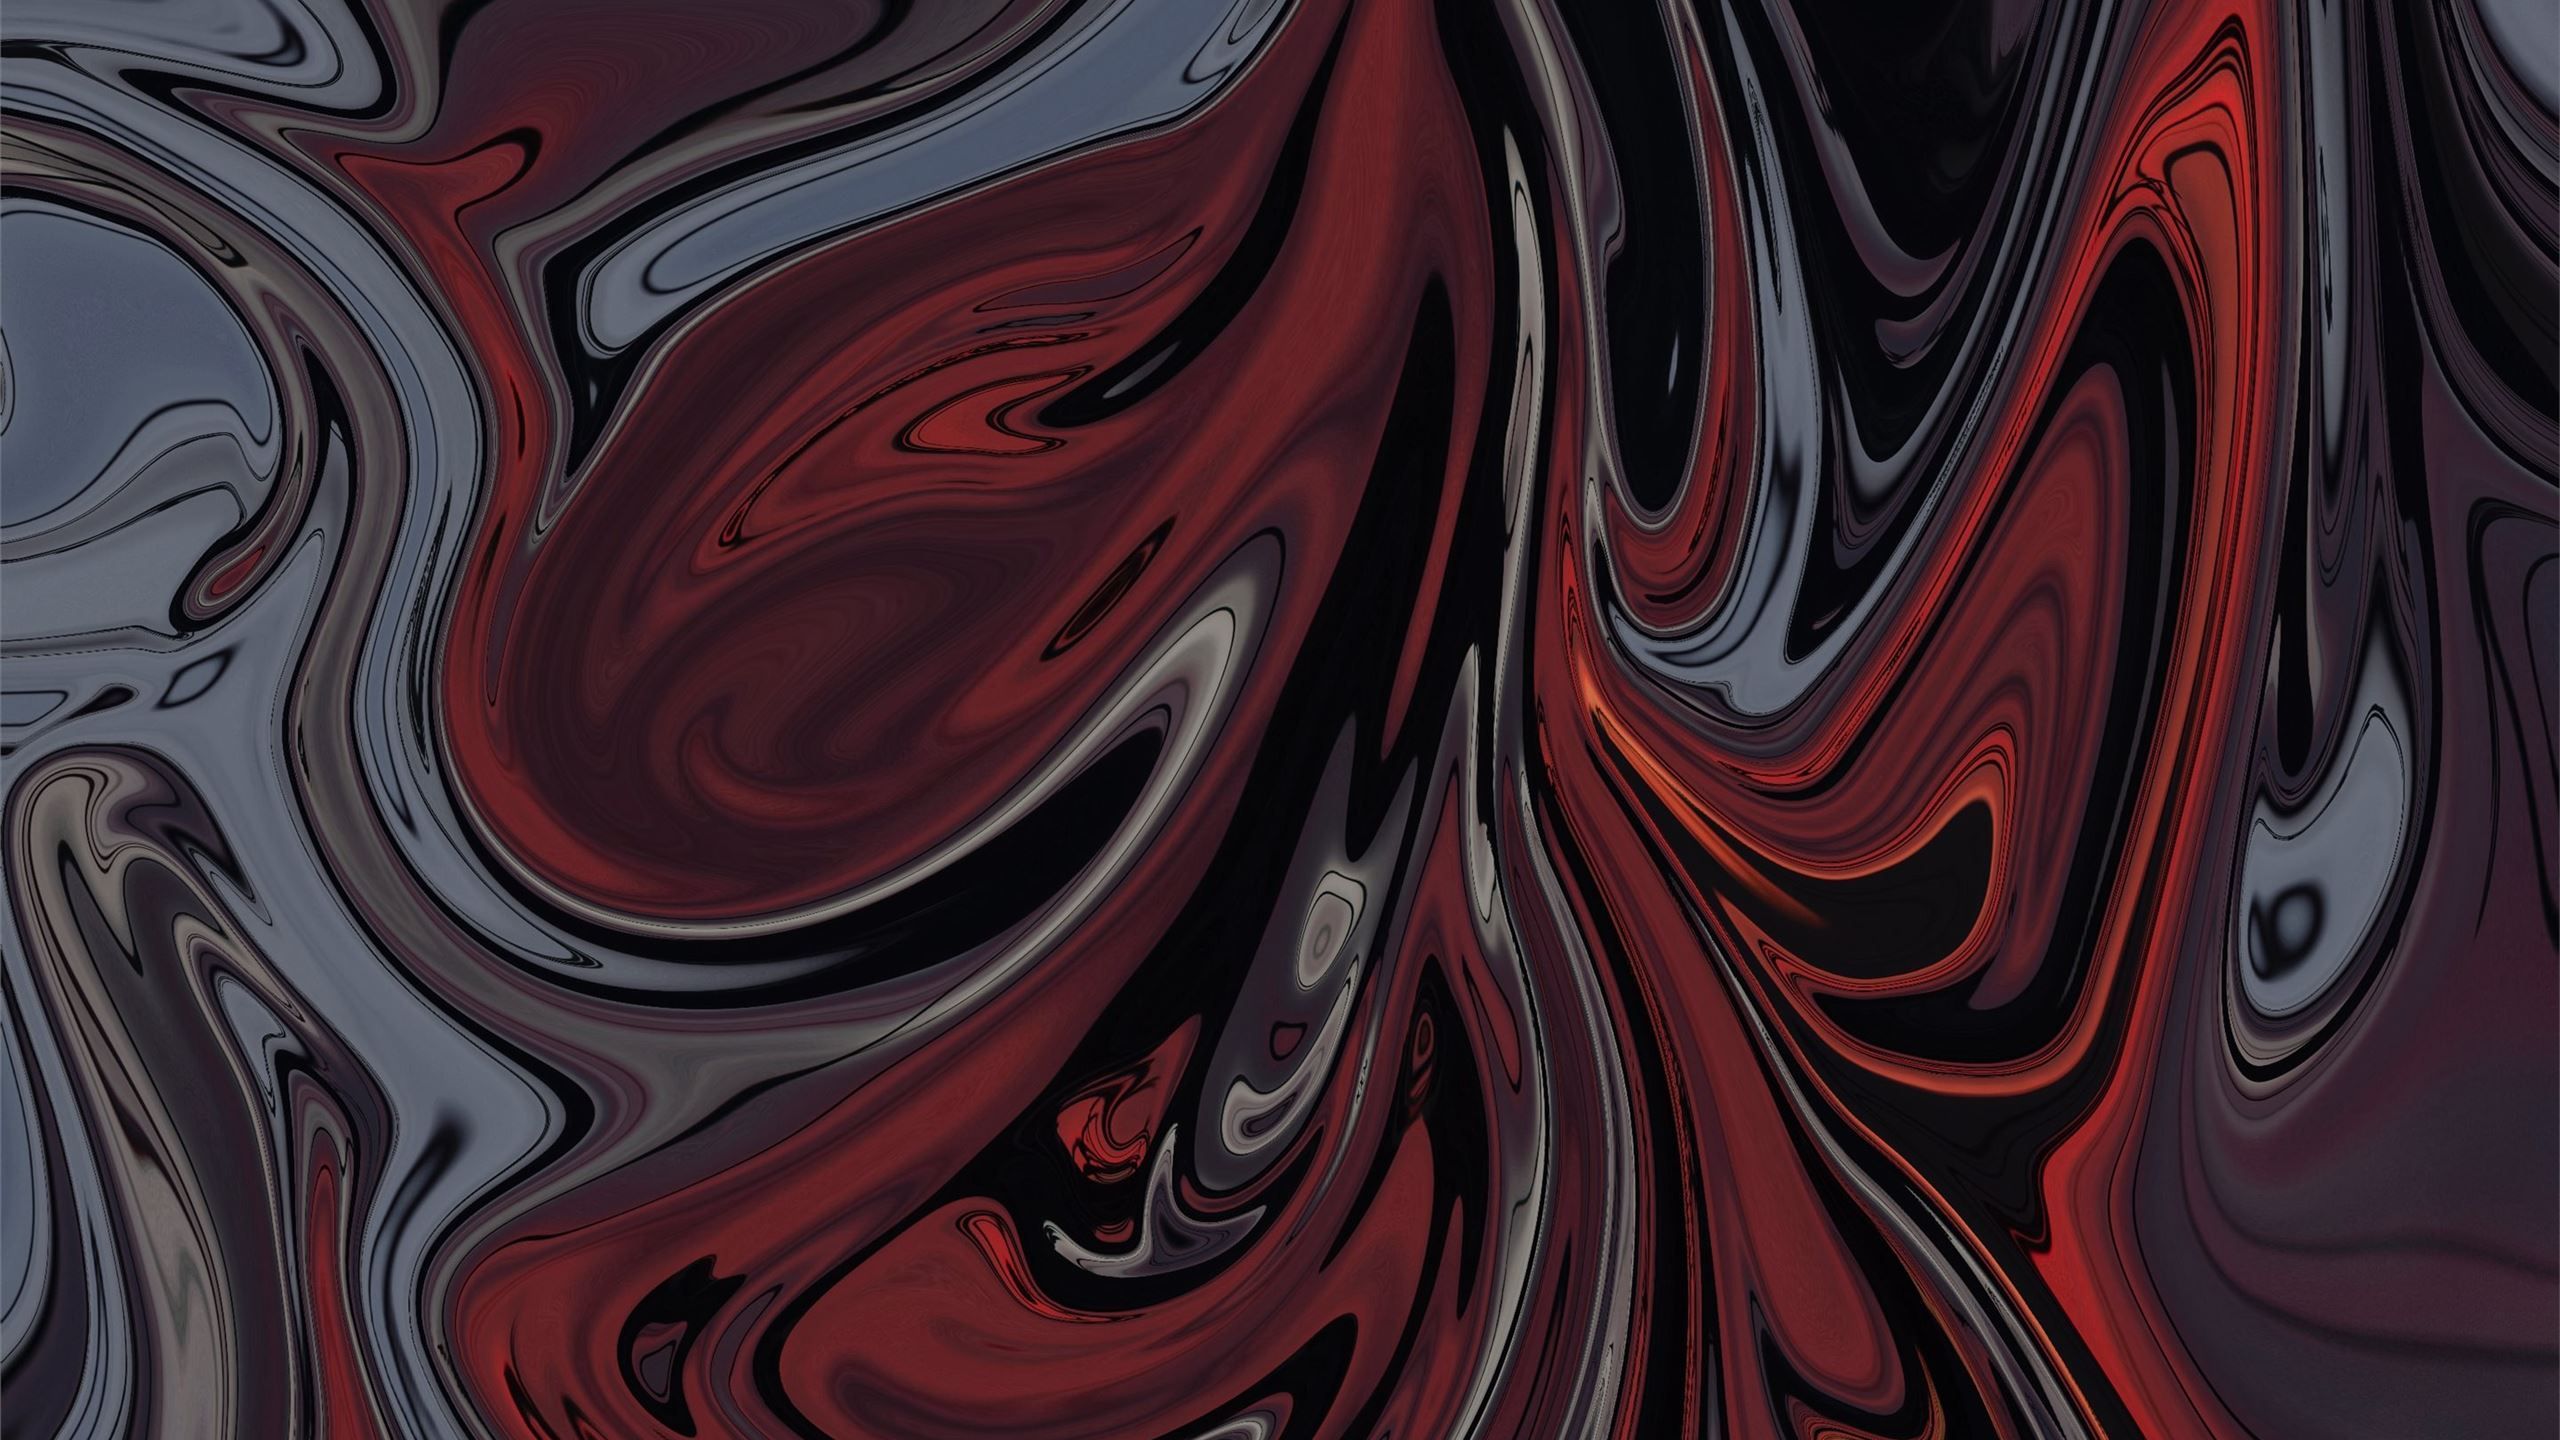 A red and black abstract artwork - Modern